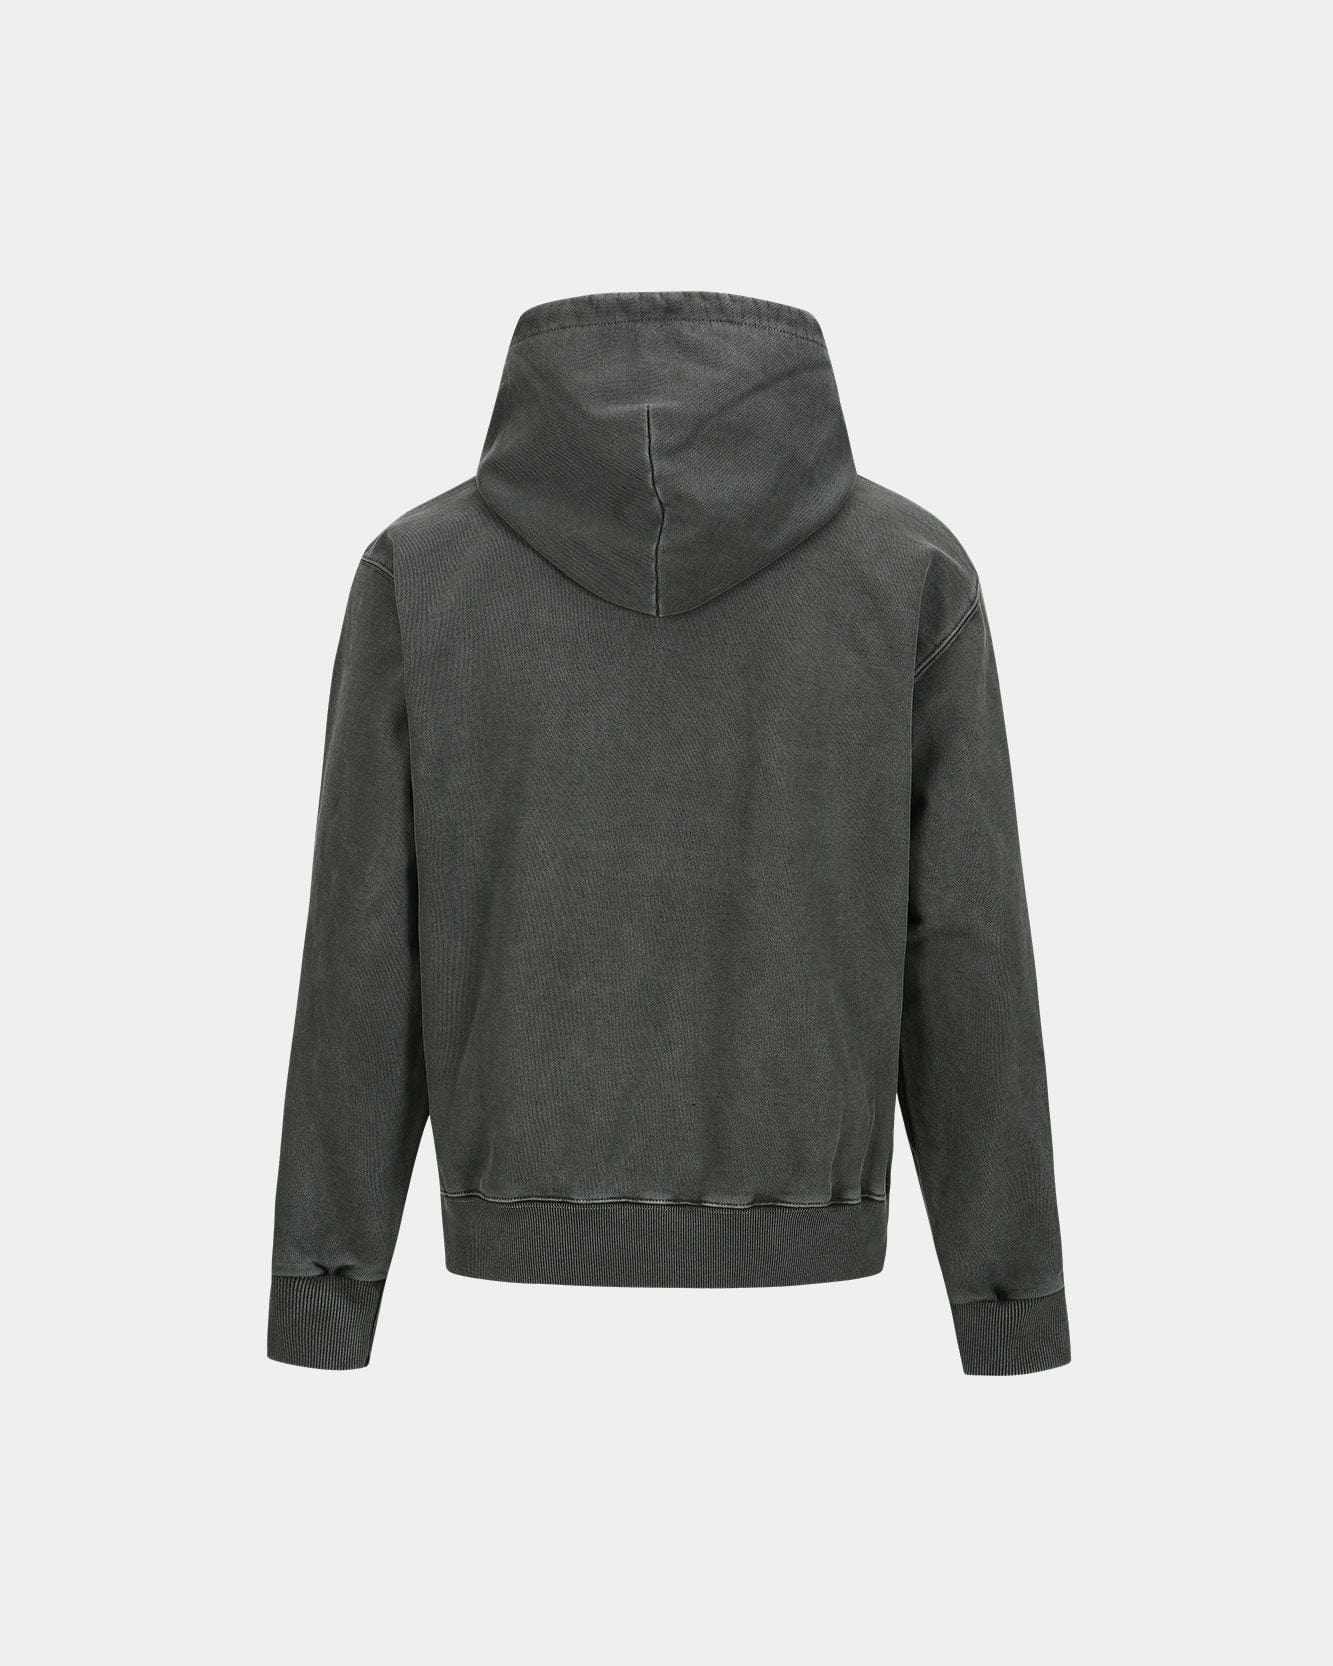 Andersson Bell (ESSENTIAL) ADSB HEARTS CARD HOODIE atb1084u(CHARCOAL)_WOMEN